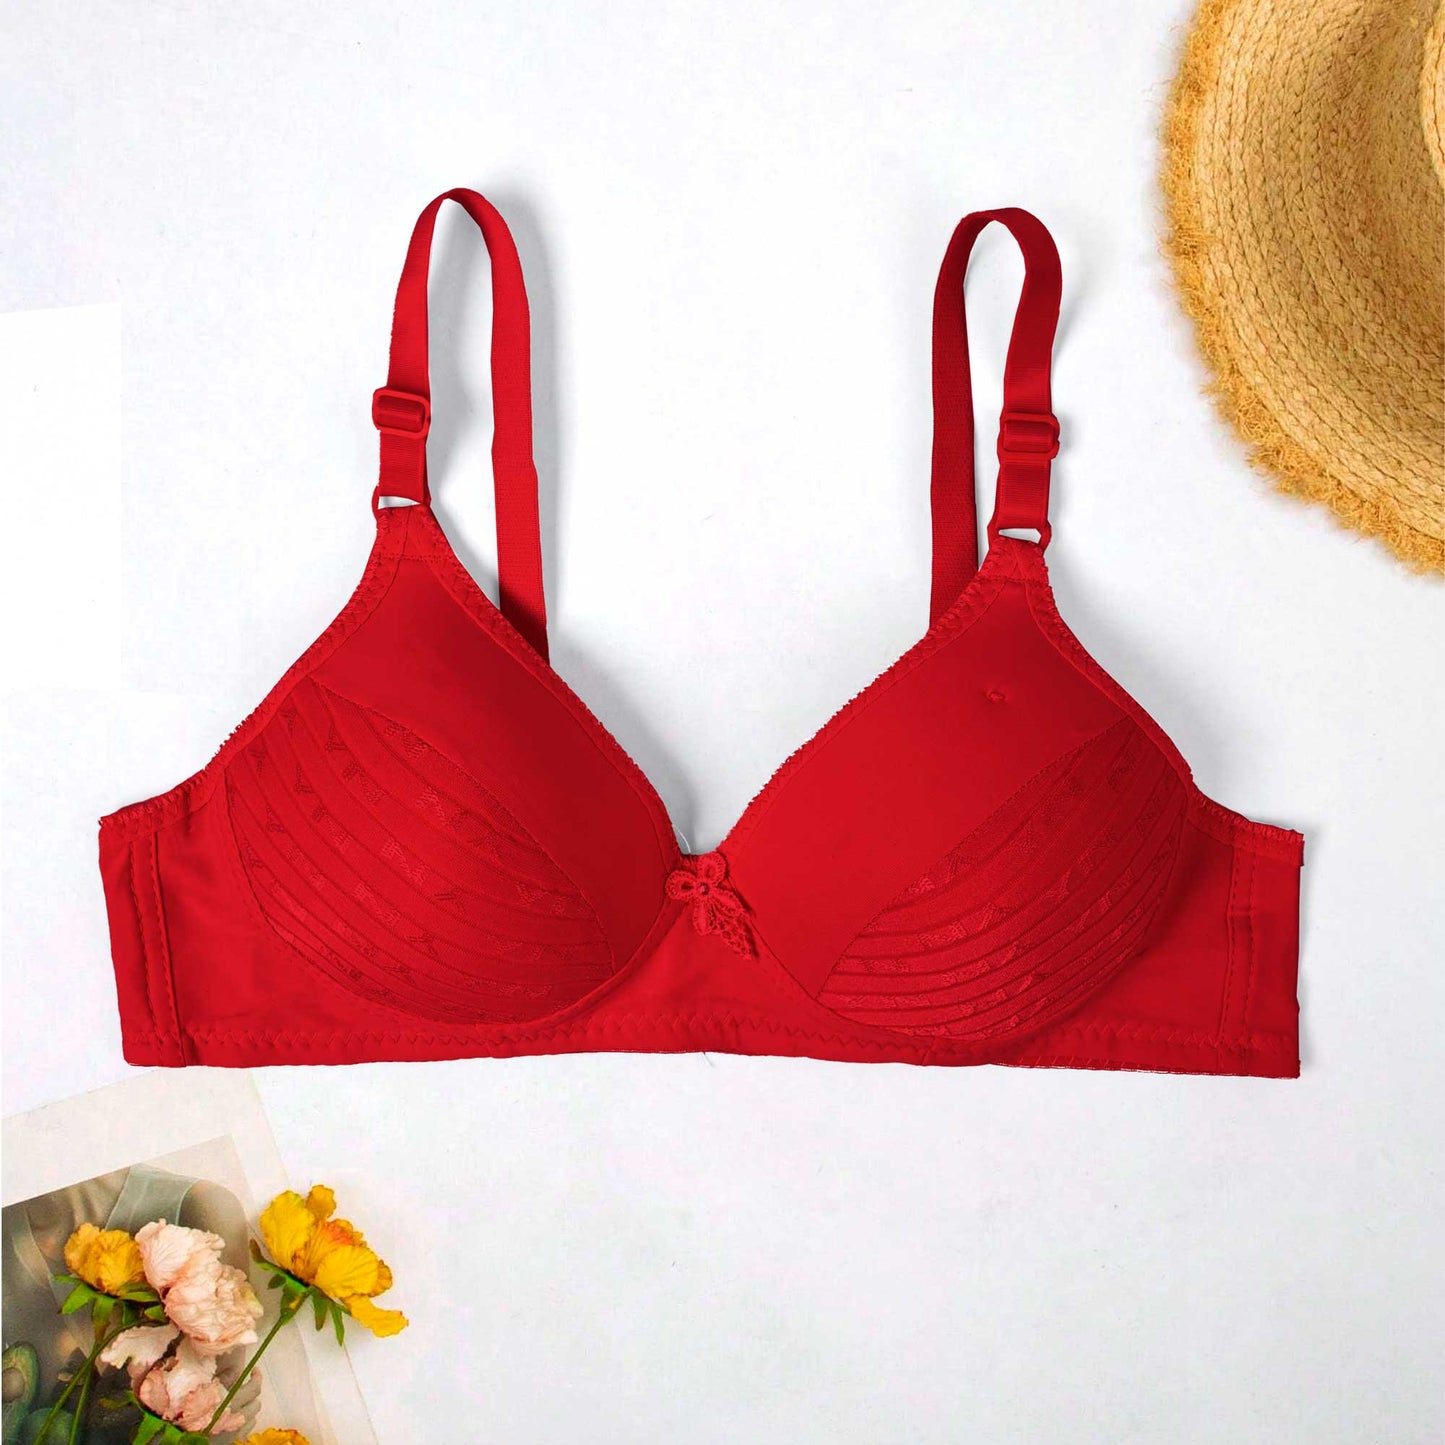 Vienna Women's Stretched Push Up Padded Bra Women's Lingerie RAM Red 30 